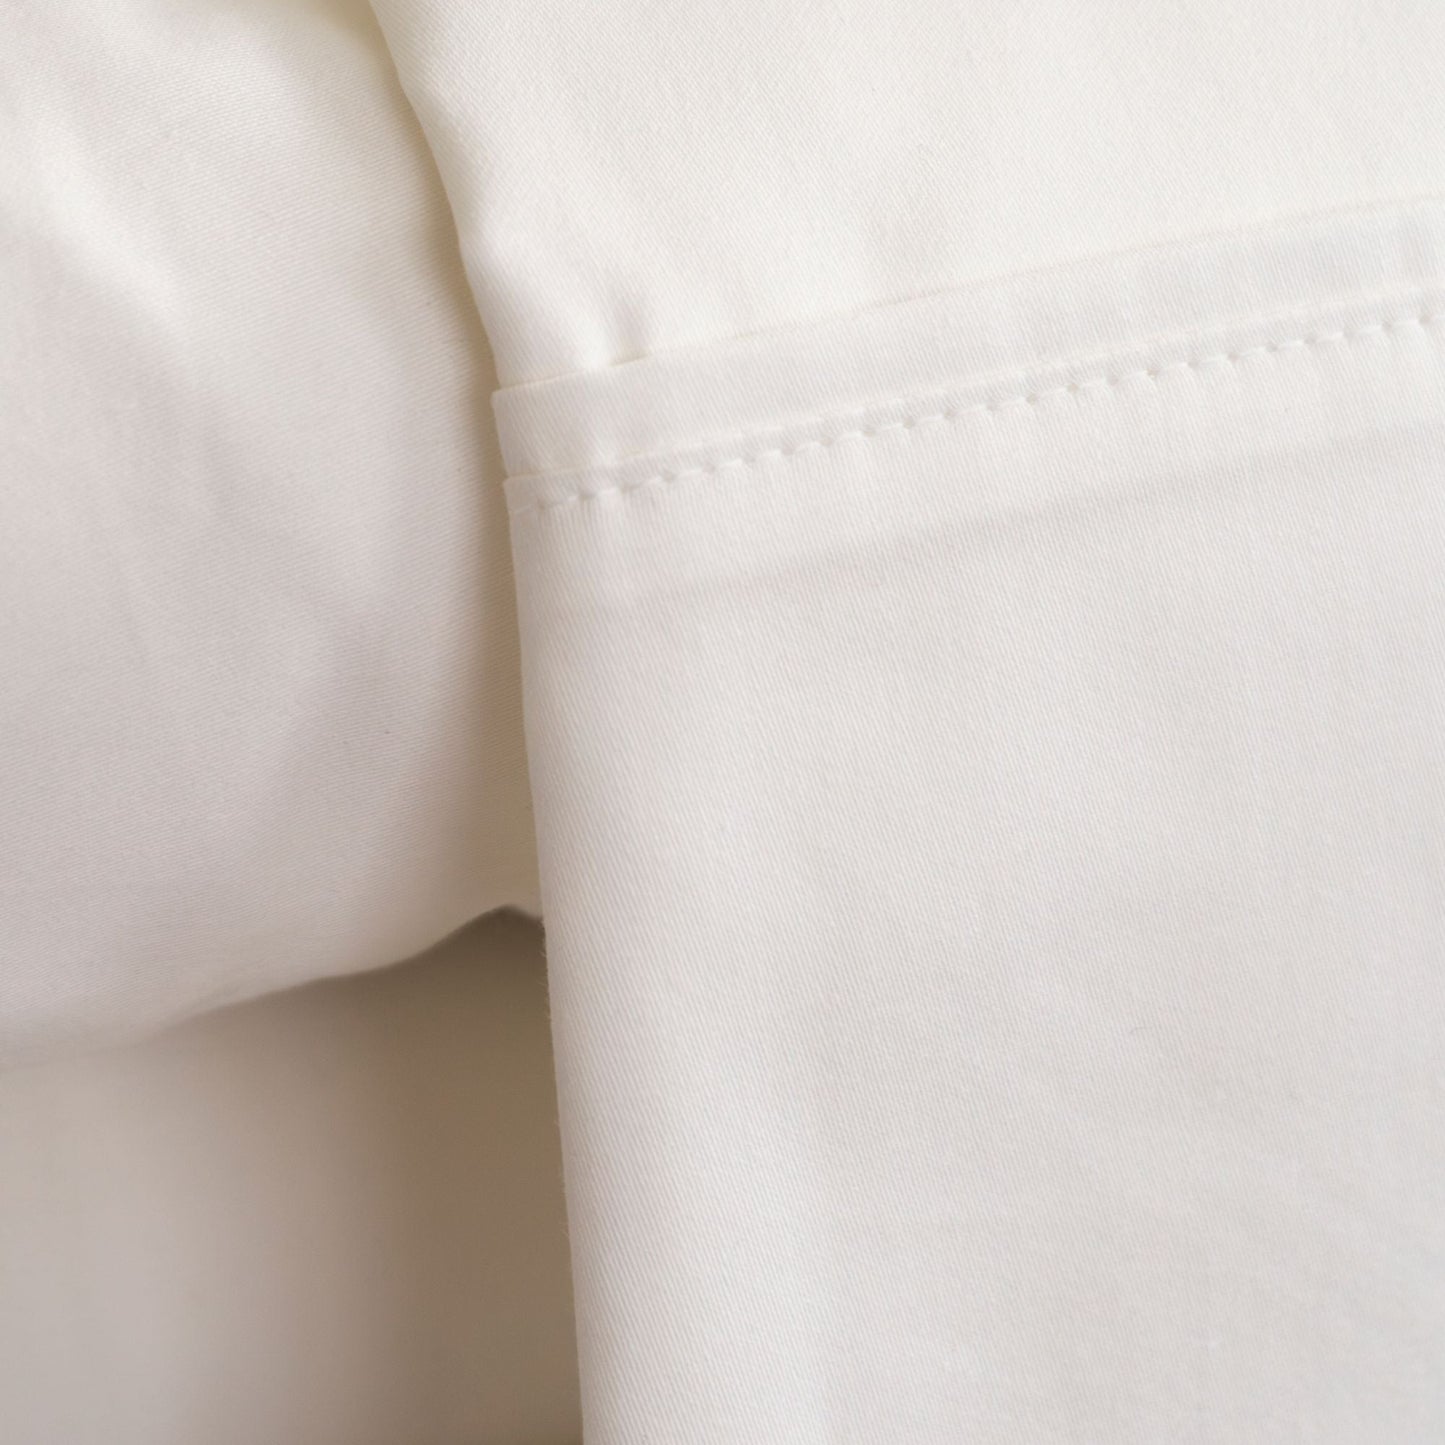 Protect-A-Bed Staynew® Cotton Sheet Set King